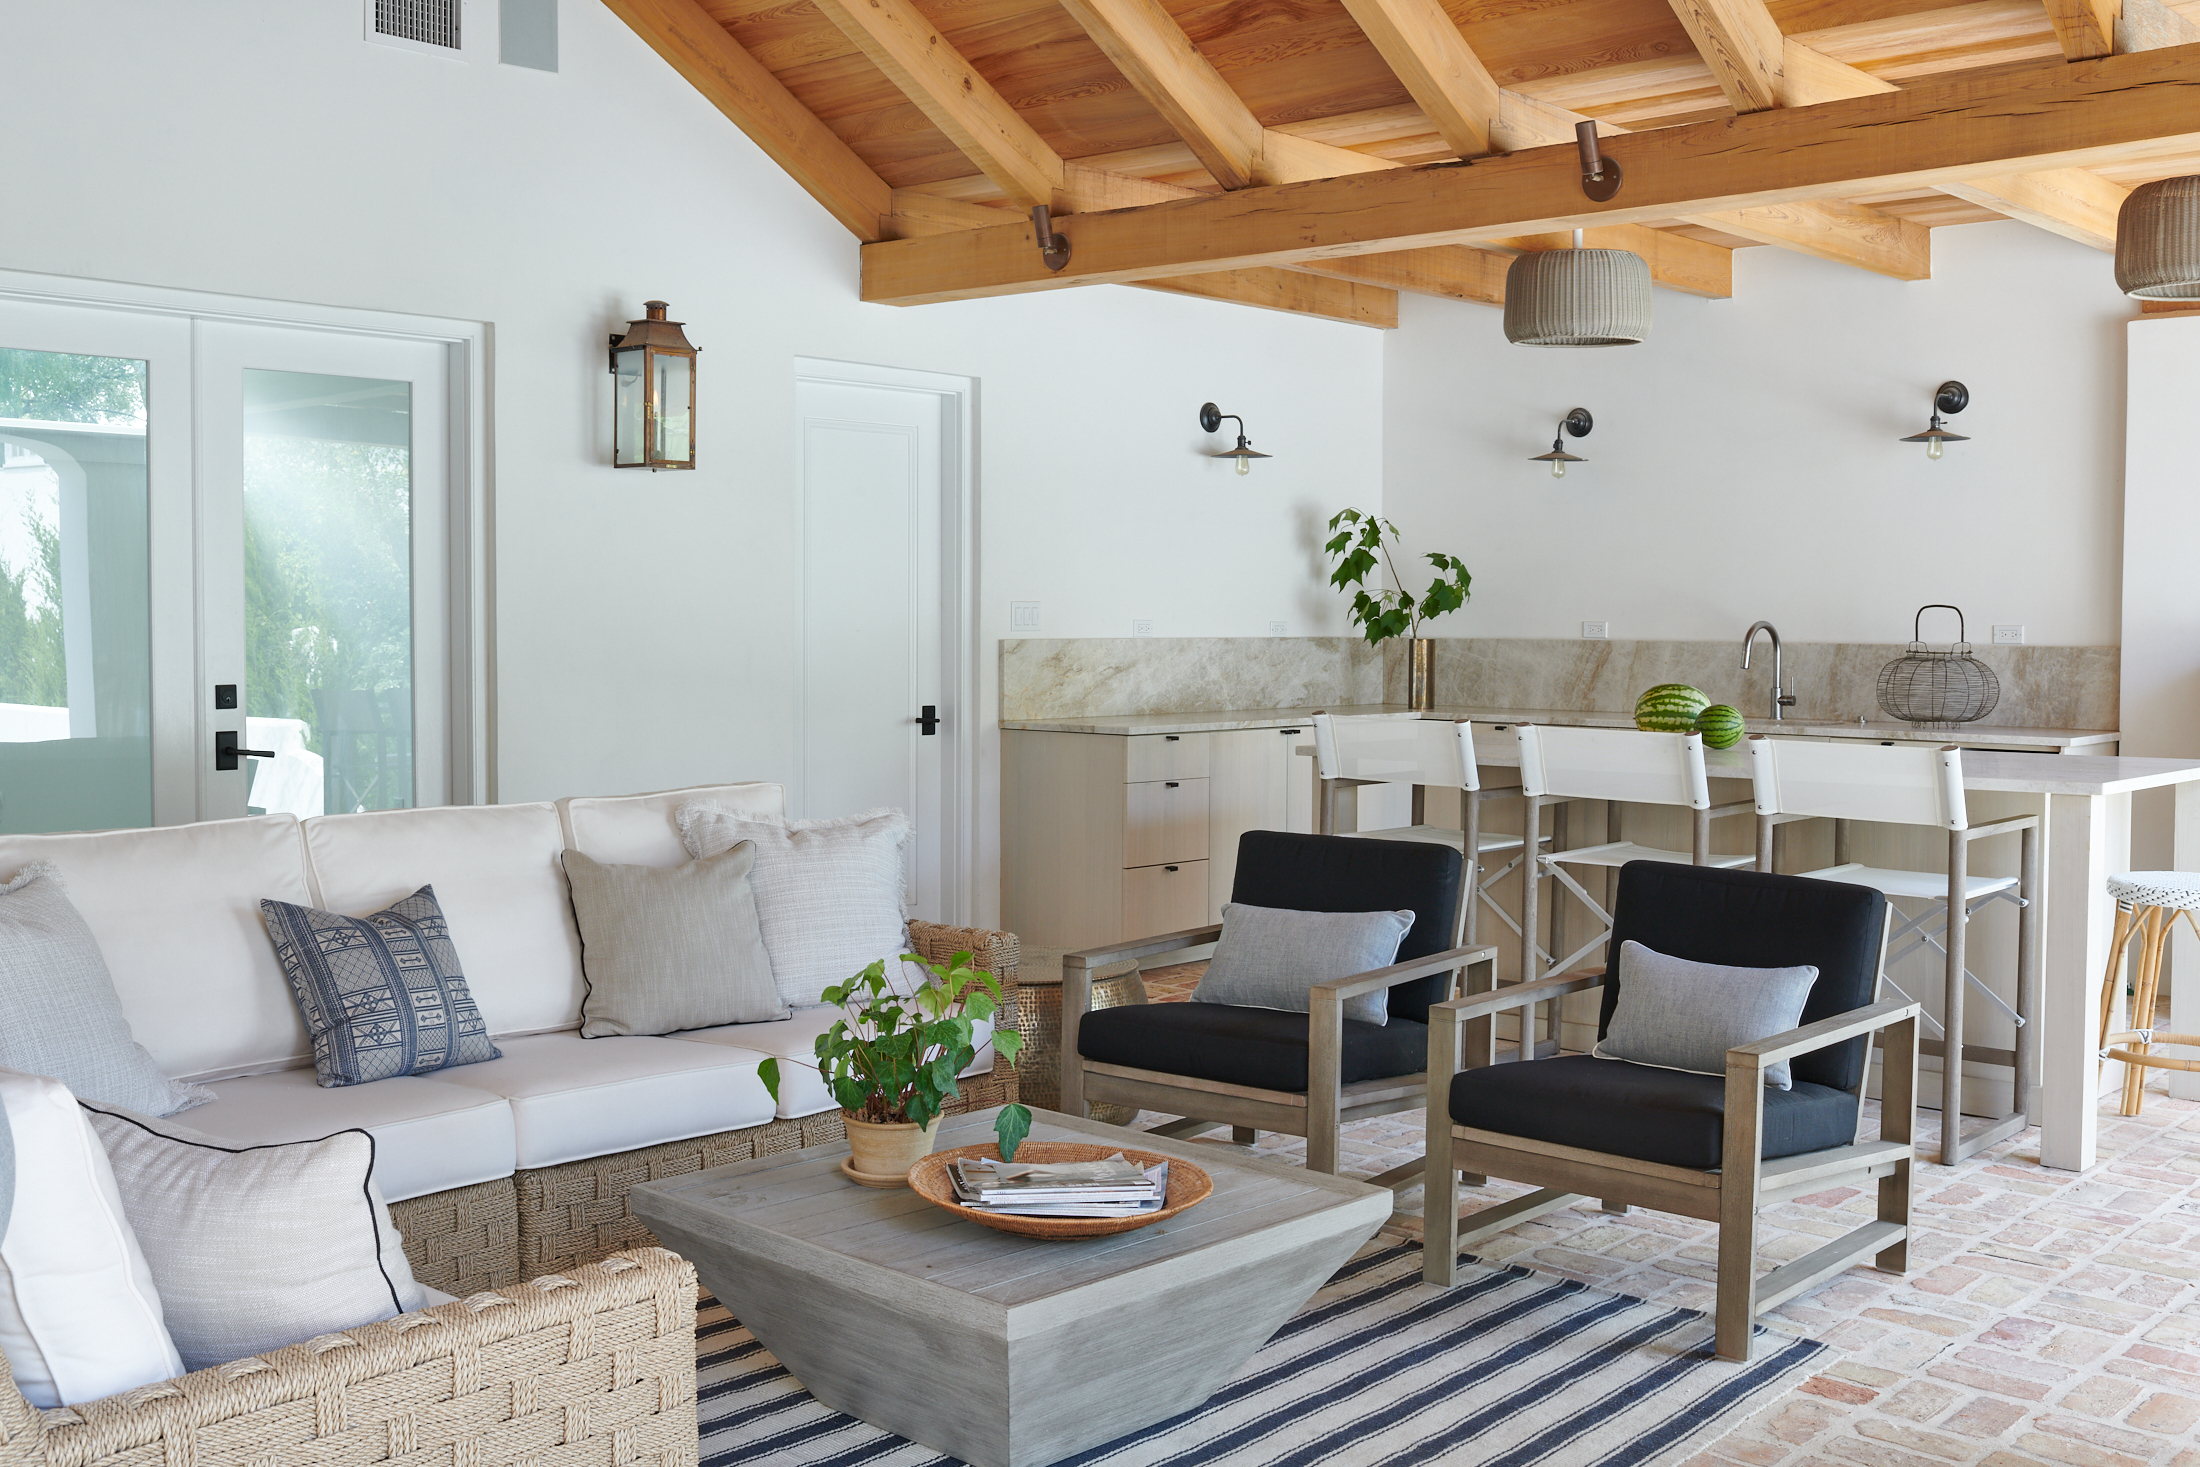 Outdoor seating area in neutral colors by Alison Gootee Photography for Logan Killen Interiors 